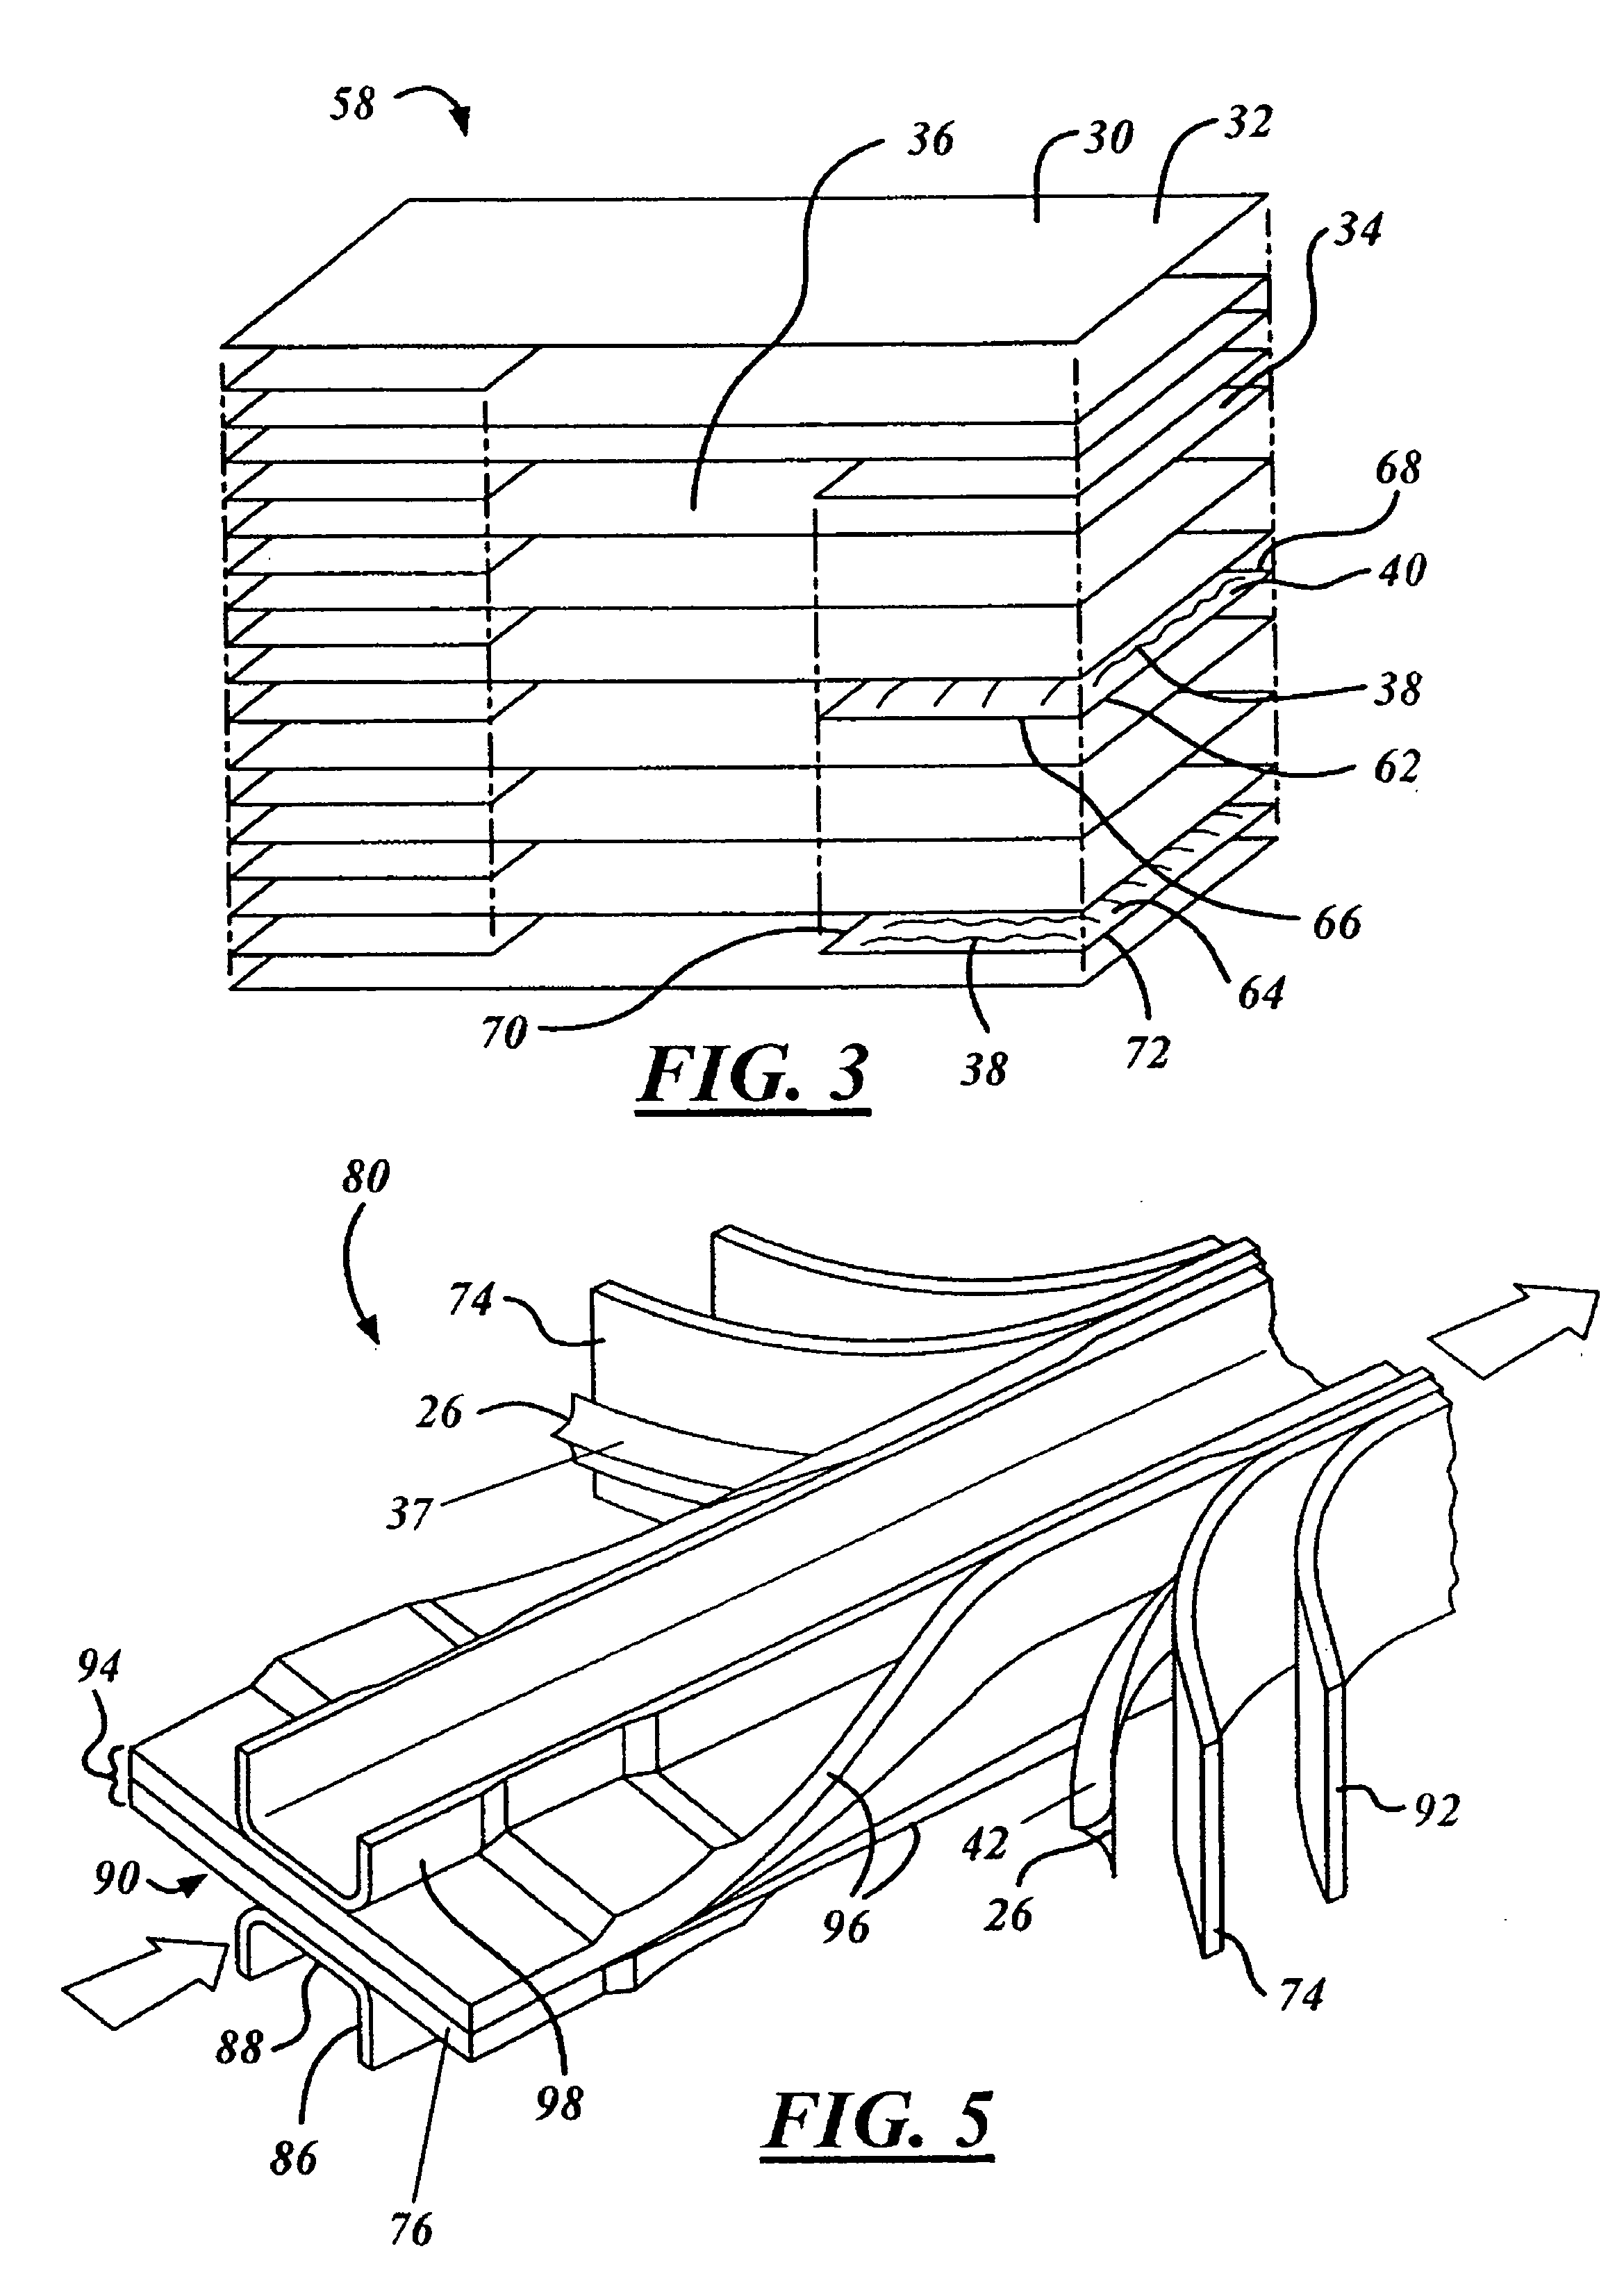 Fabrication process for thermoplastic composite parts